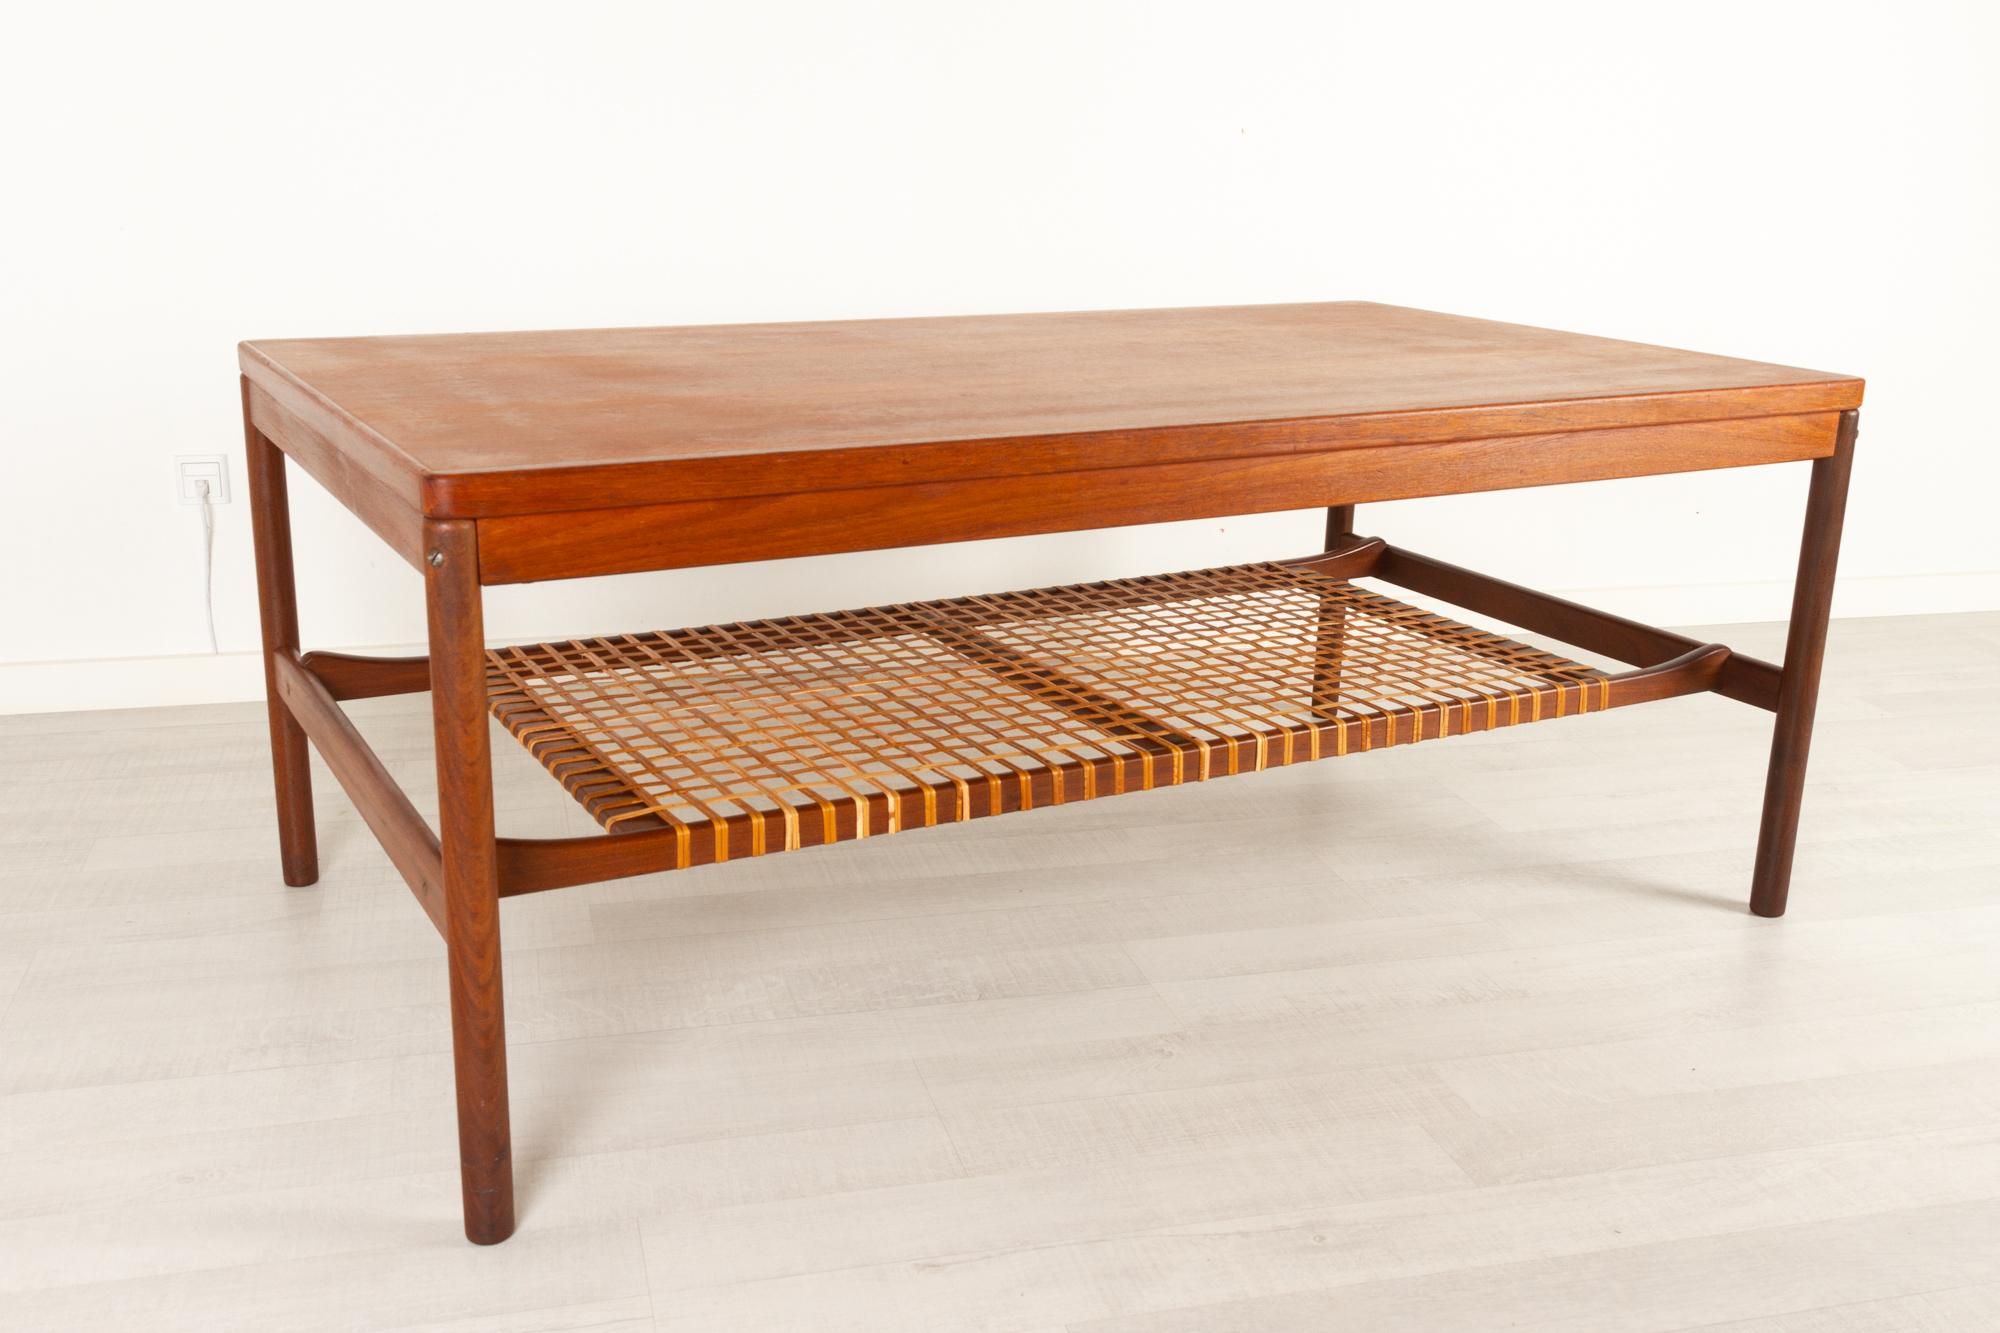 Vintage Danish teak and cane coffee table 1960s
Large Scandinavian Modern coffee table with cane shelf. Frame and round legs in solid teak. Many lovely sculptural details.
Very good original condition. A few strands of cane has been replaced.